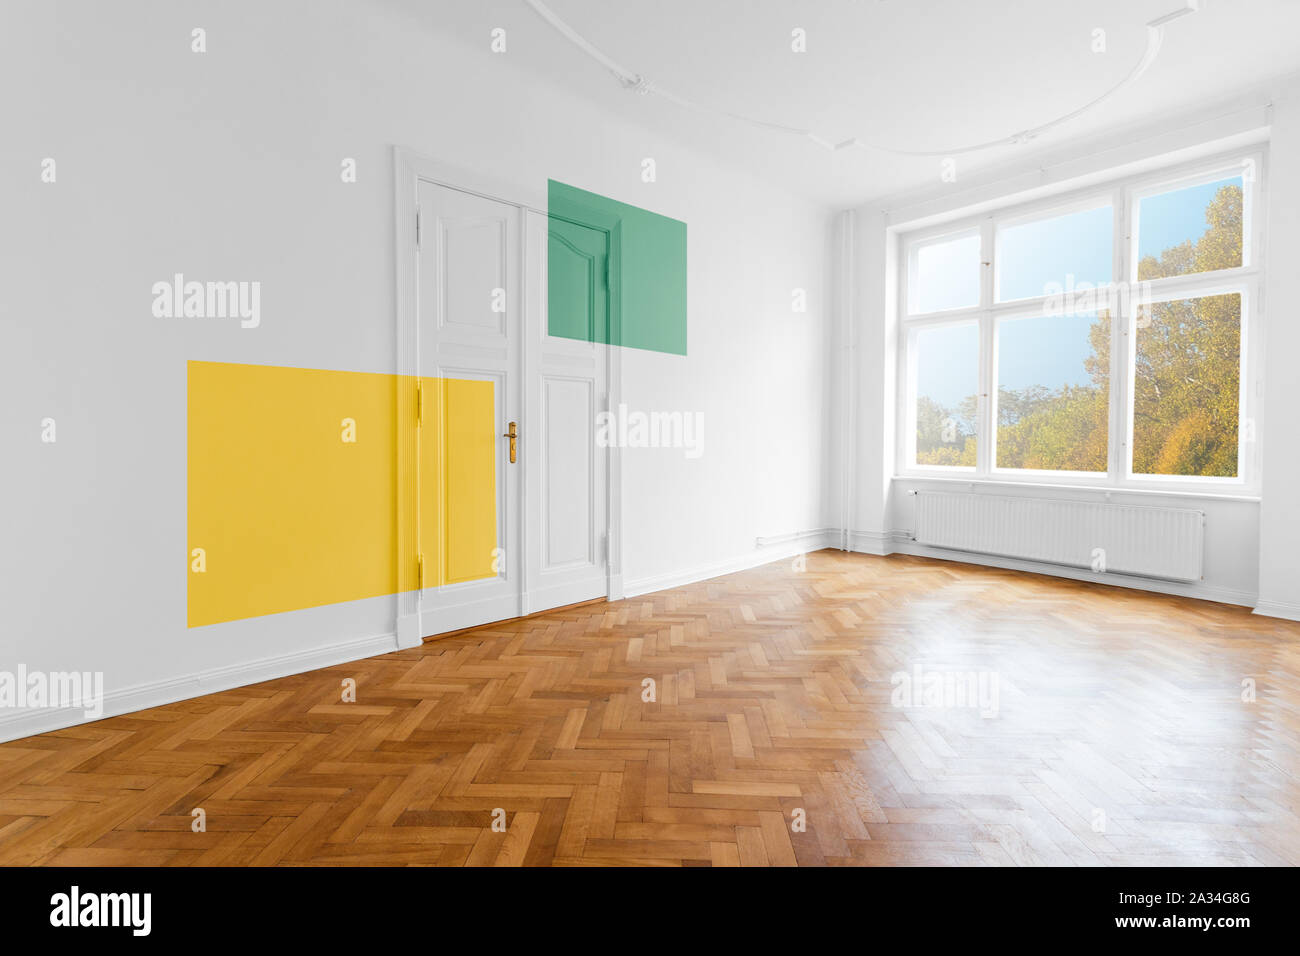 Empty room with colored painted wall - Home decoration and renovation concept Stock Photo